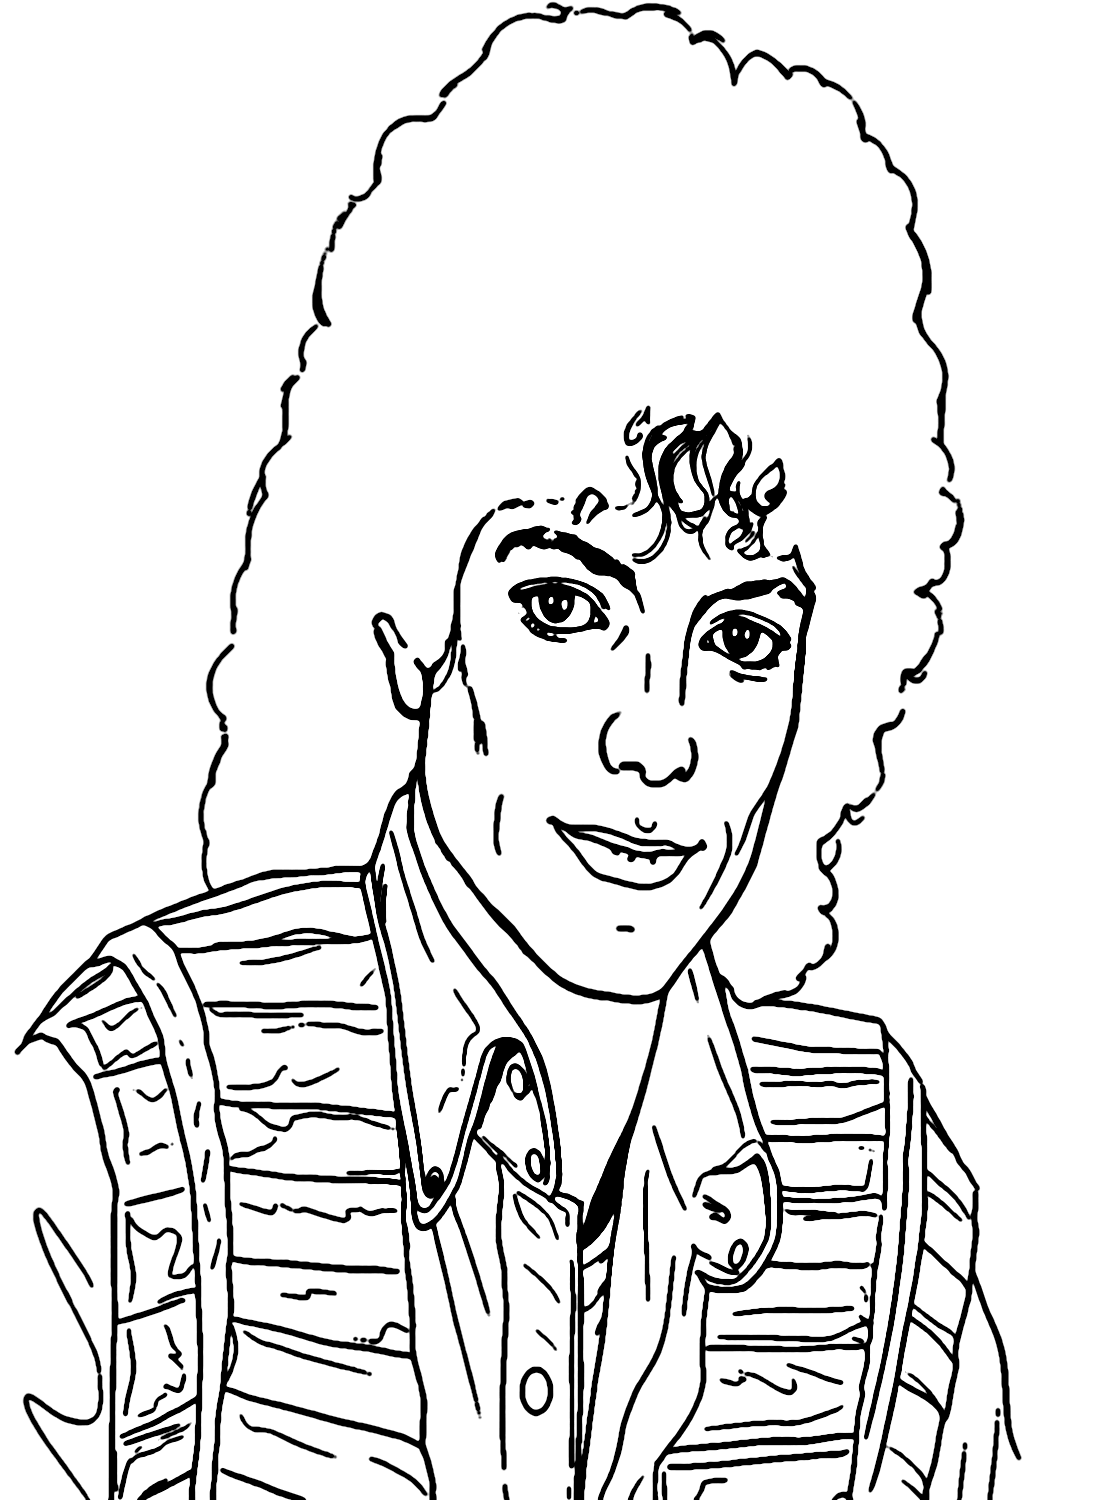 Free Michael Jackson Coloring Page - Free Printable Coloring Pages